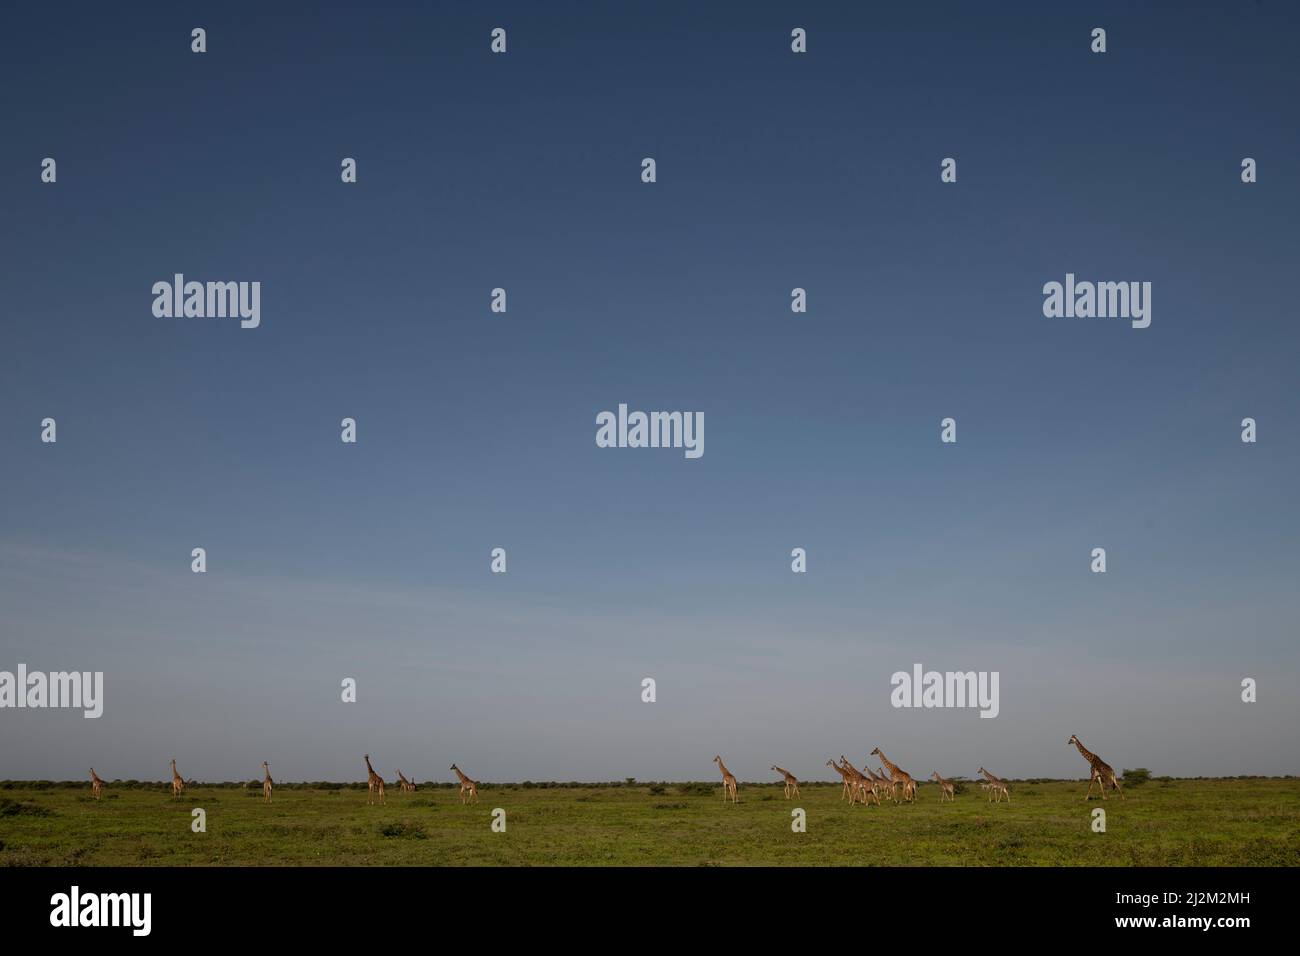 Girafe Herd on the Plains, Tanzanie Banque D'Images